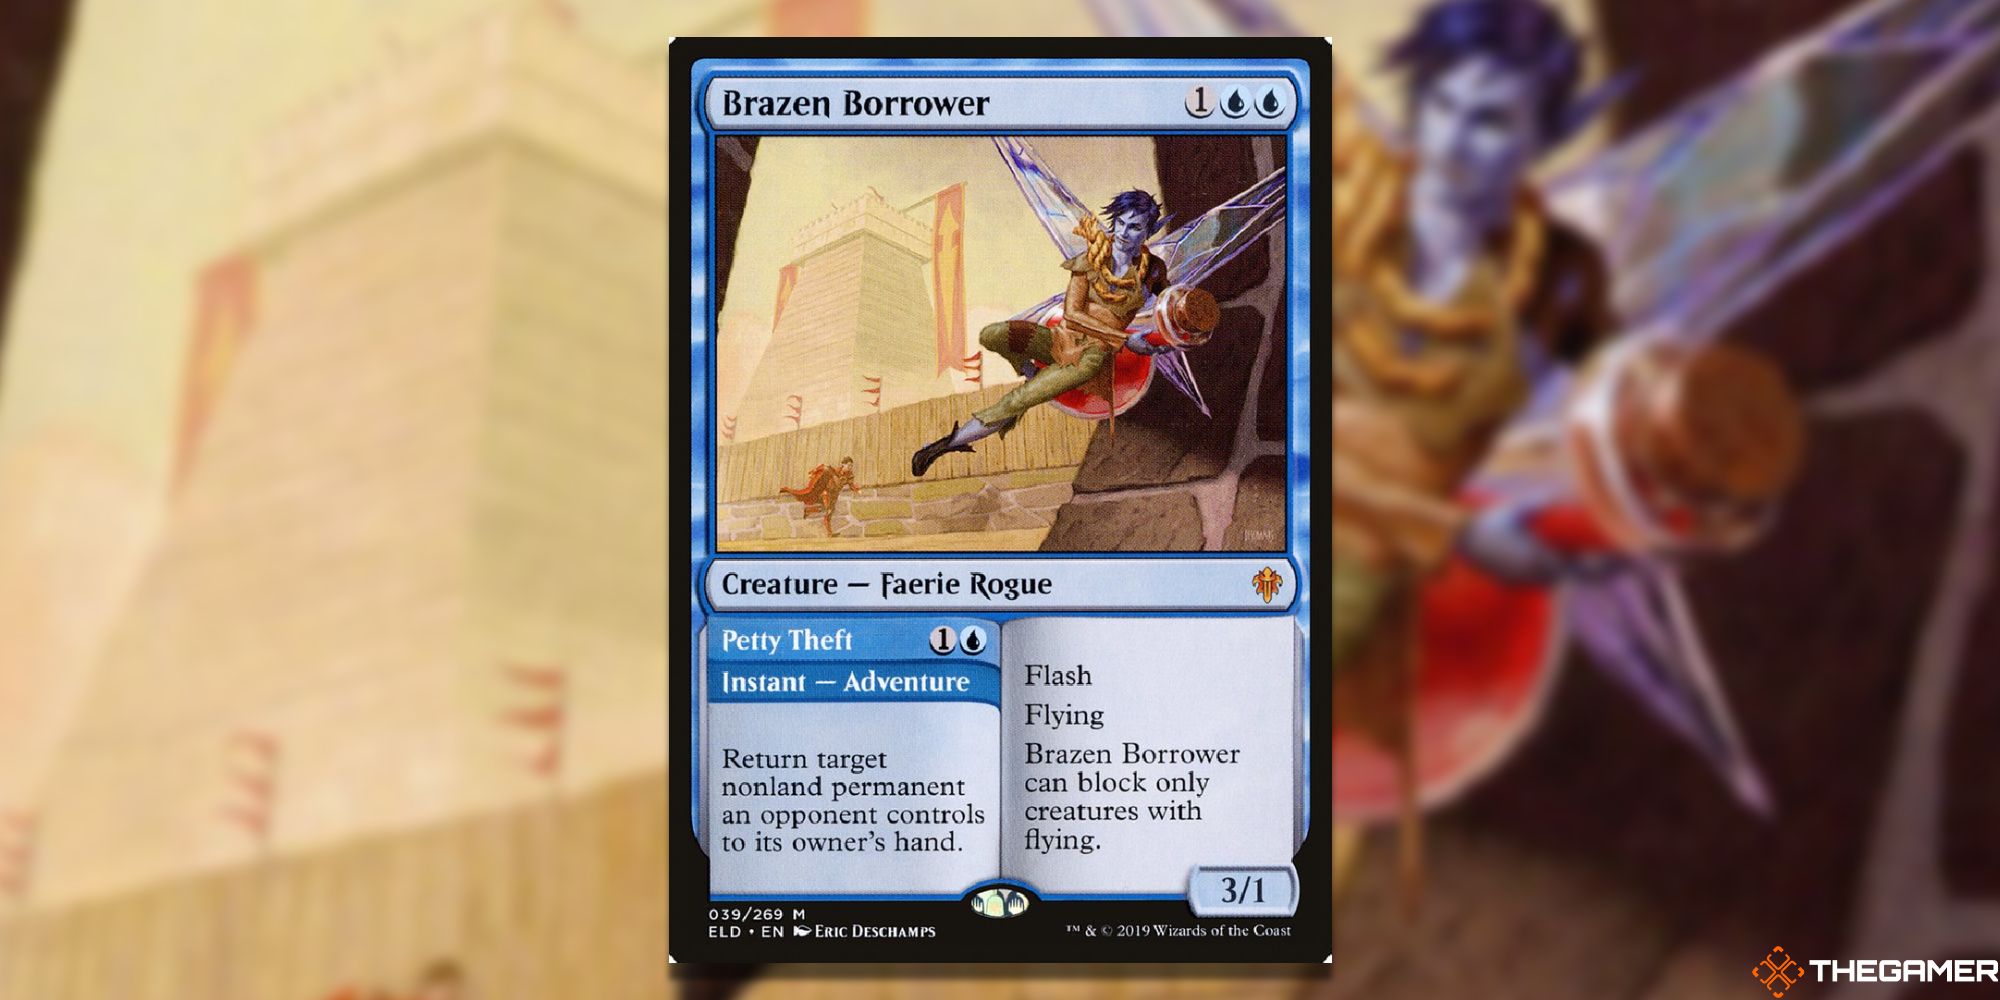 Image of the Brazen Borrower card in Magic: The Gathering, with art by Eric Deschamps